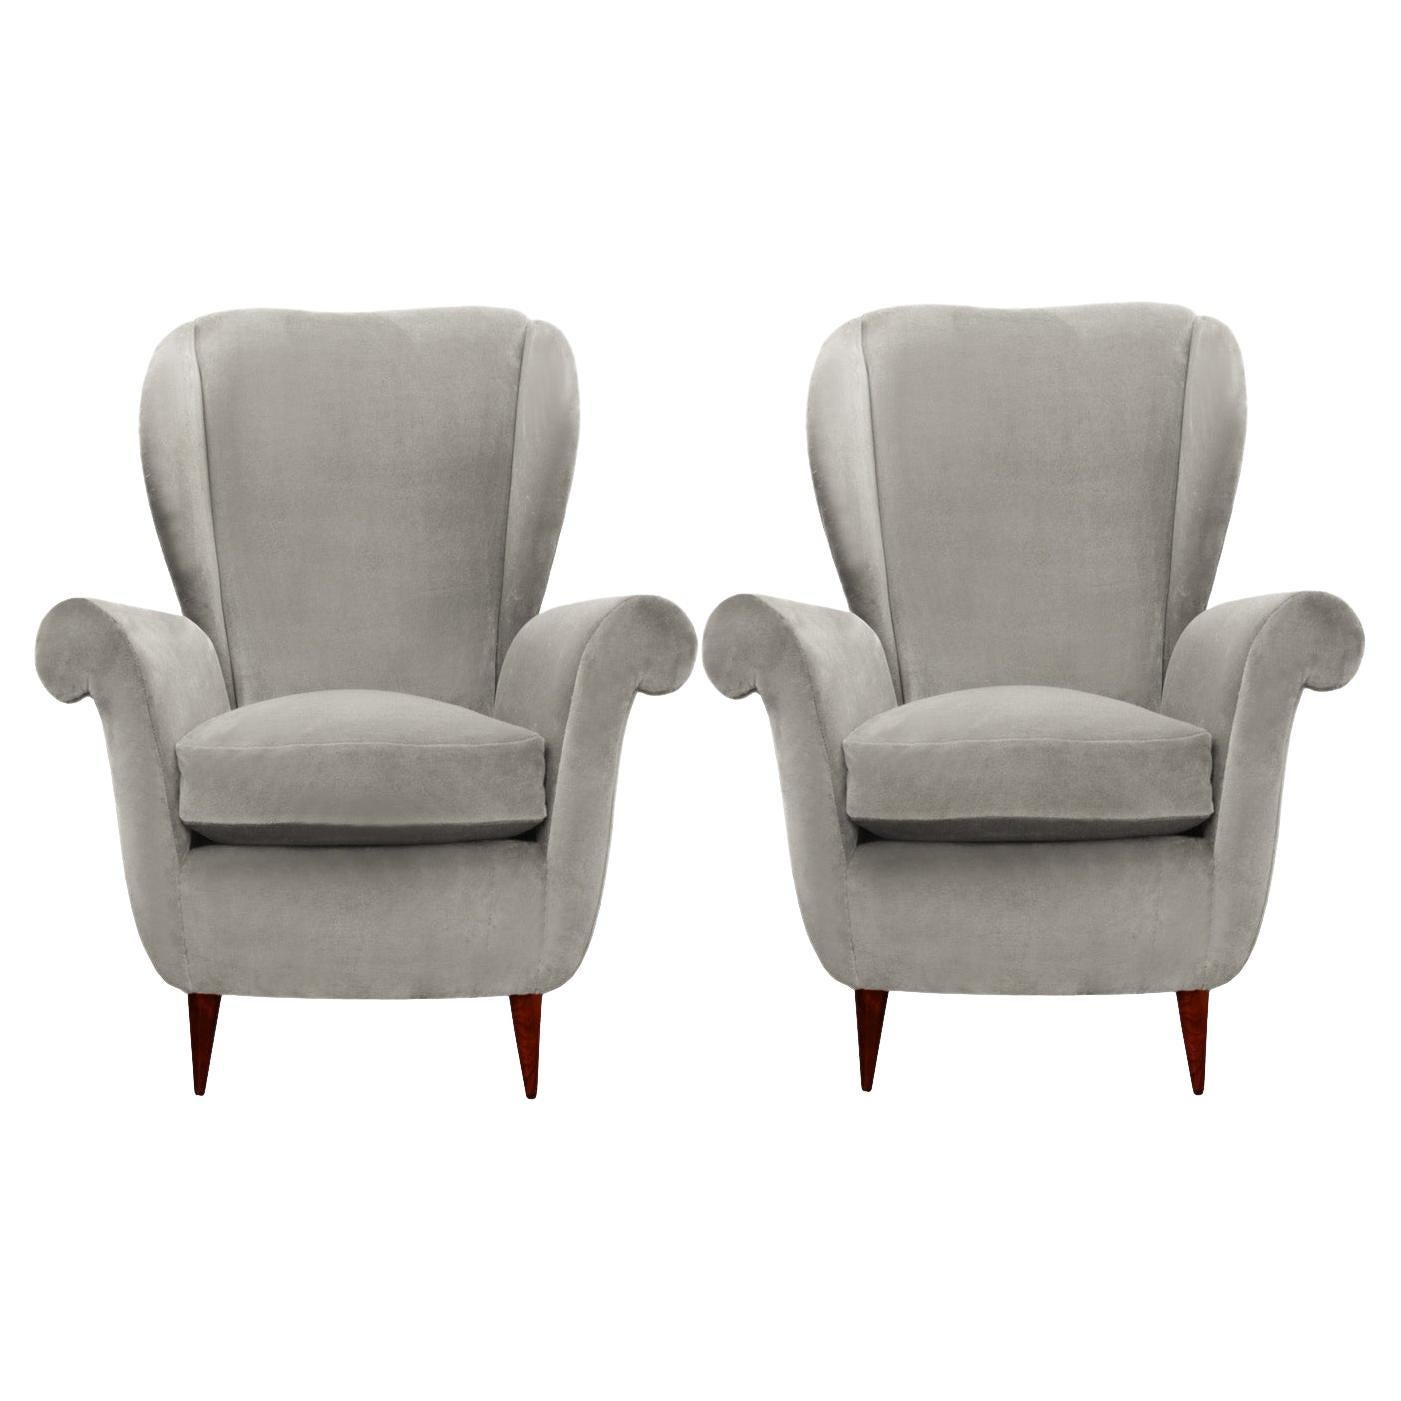 Stylish Pair of Mid-Century Modern High Back Wing Chairs, 1950s For Sale